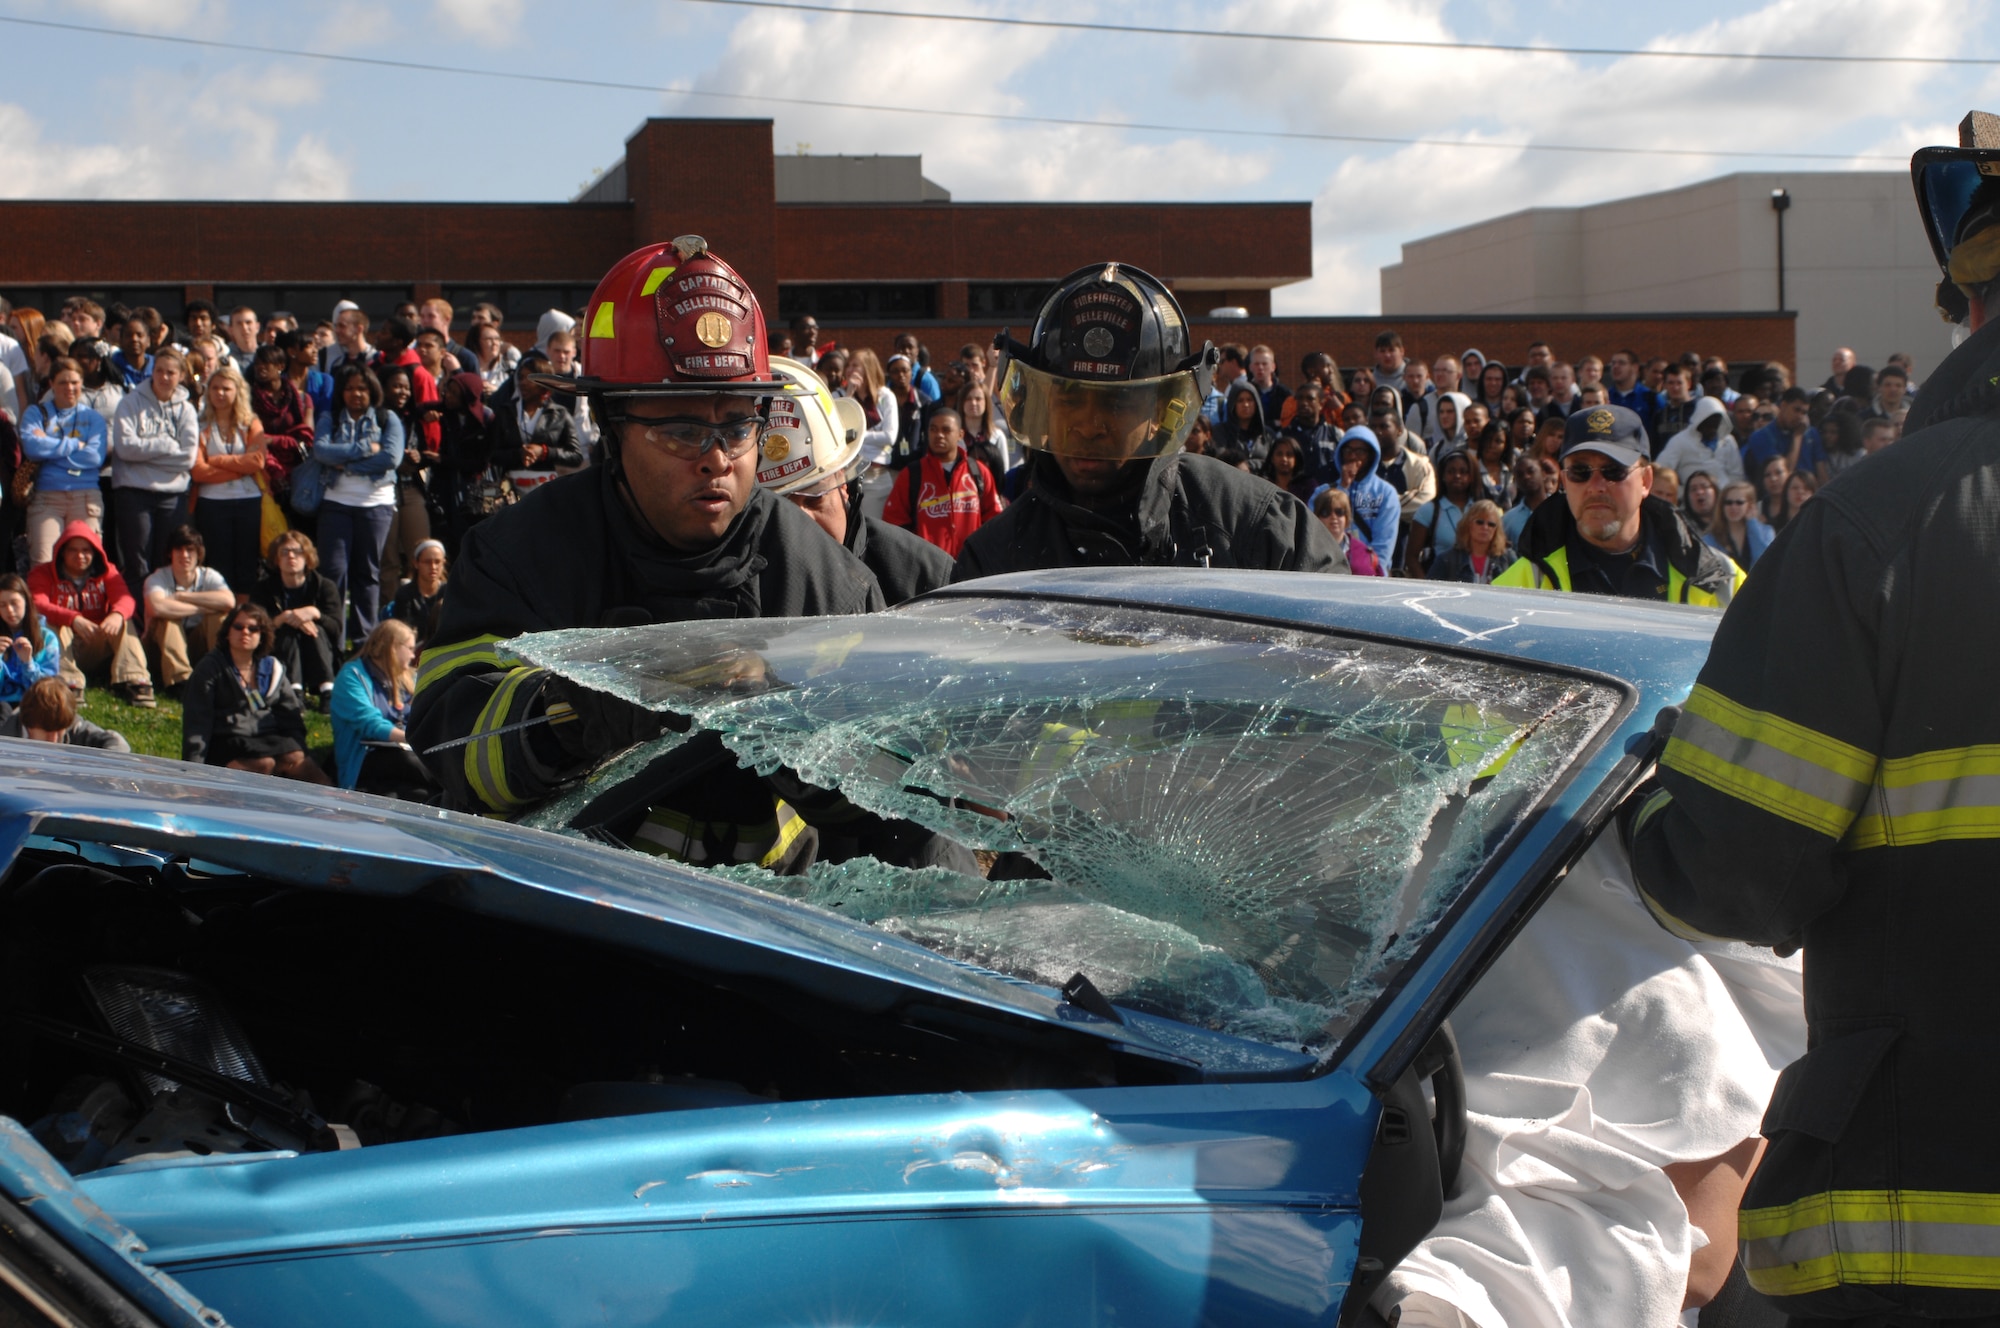 BELLEVILLE, Ill. -- Belleville Fire Department firefighters remove the glass from a vehicle involved in a simulated alcohol-related car accident before removing the top of the car to access one deceased and two critically injured victims. (U.S. Air Force Photo by Airman 1st Class Amber Kelly-Herard) 